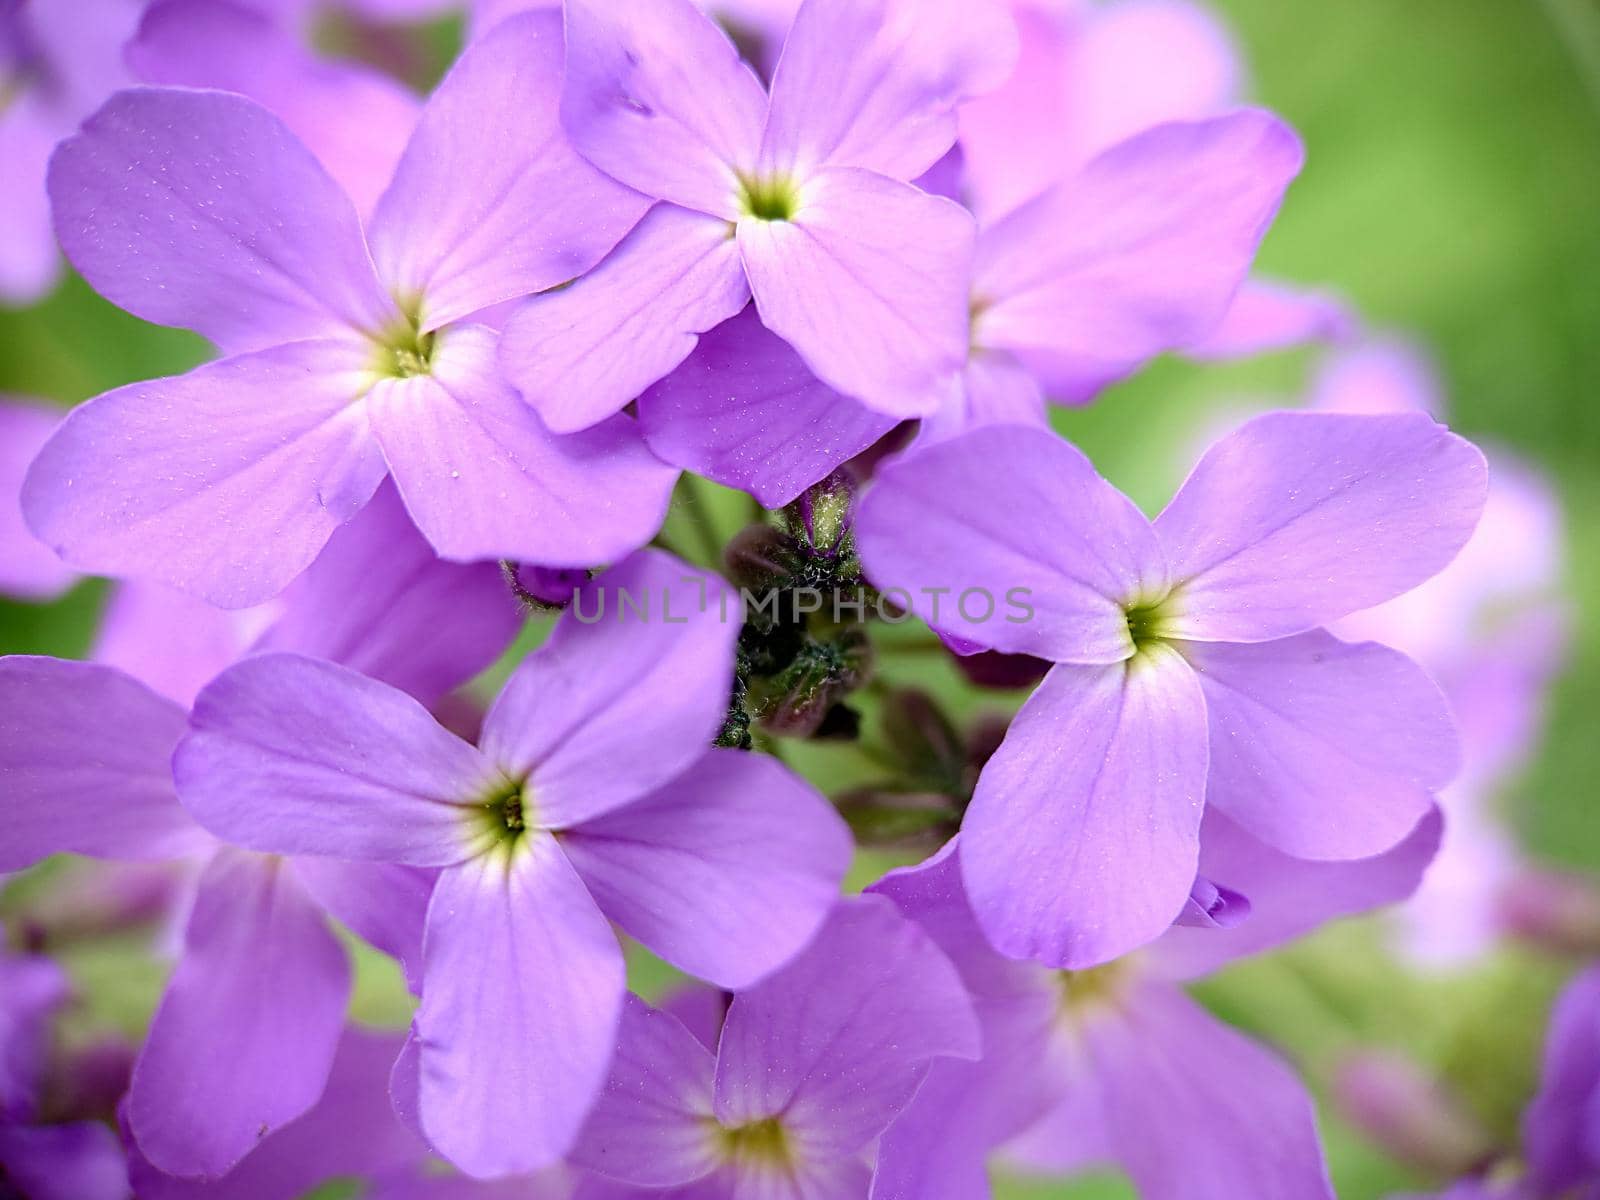 Macrophotography.Pale lilac flowers with a white radiant center of the garden phlox Phlox paniculata 'Prospero' in the garden in summer